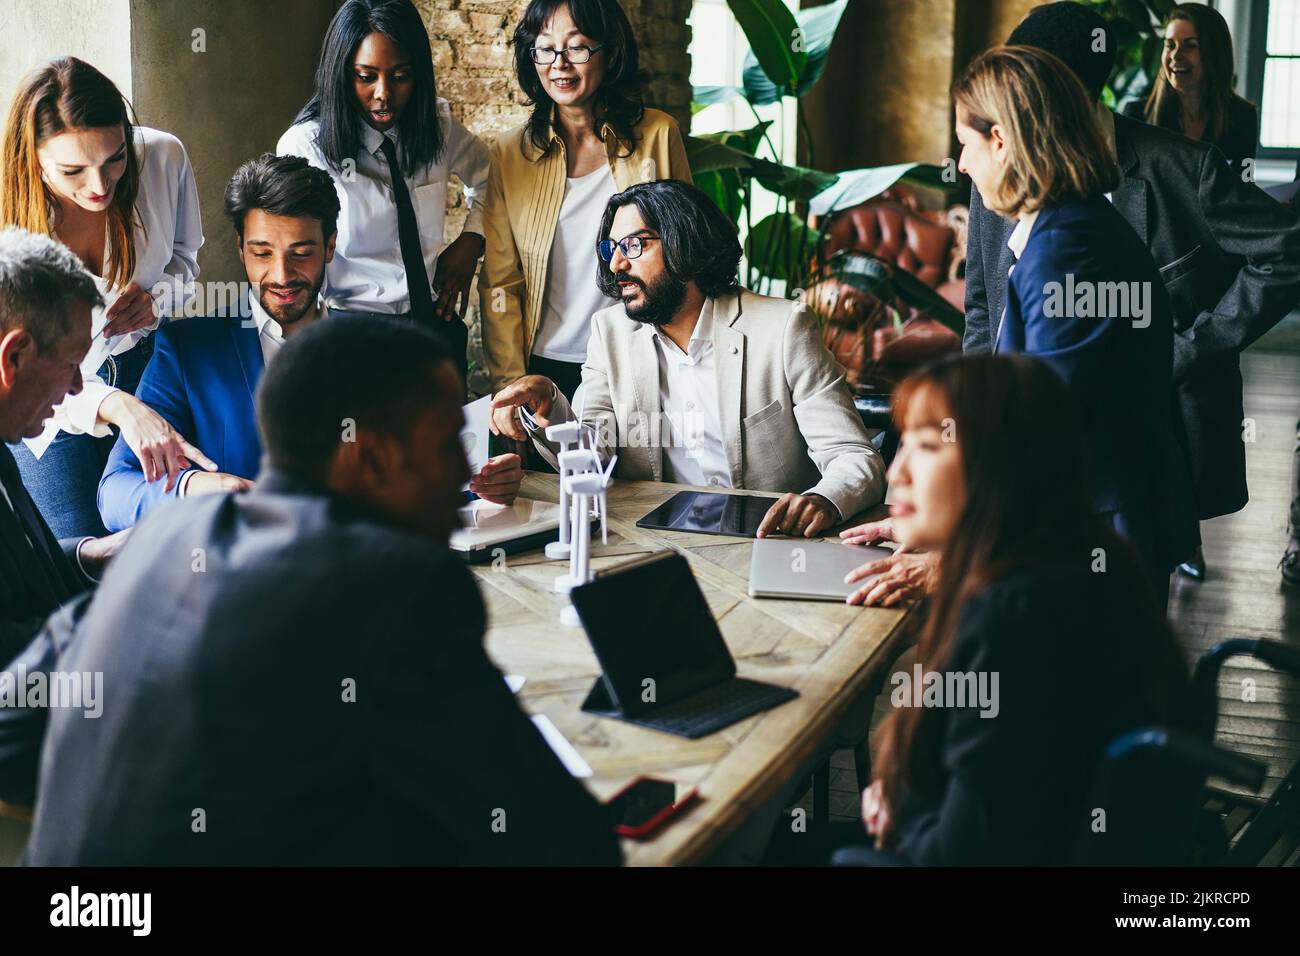 Multiracial business people working on sustainable innovation project - Focus on arabian man face Stock Photo